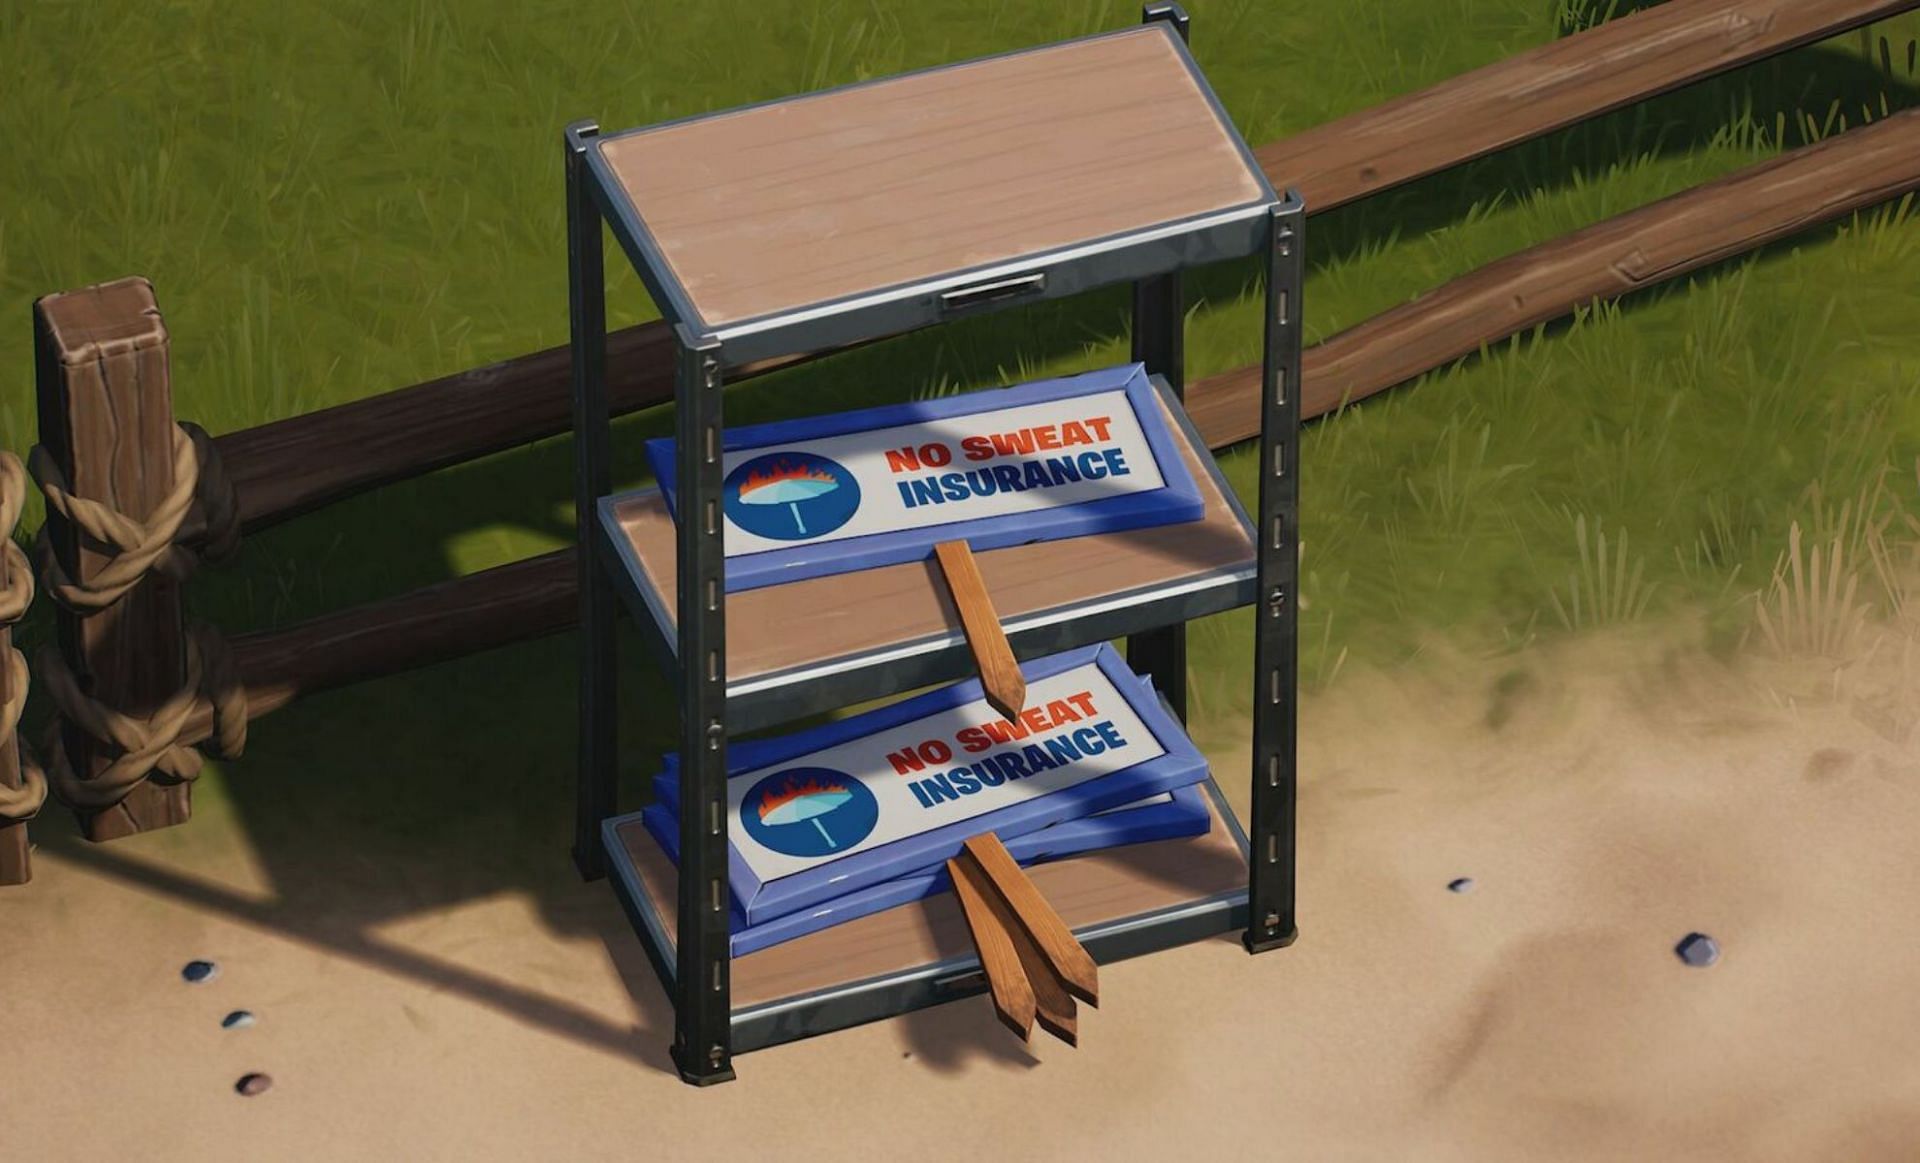 No Sweat signs in the game (Image via Epic Games)